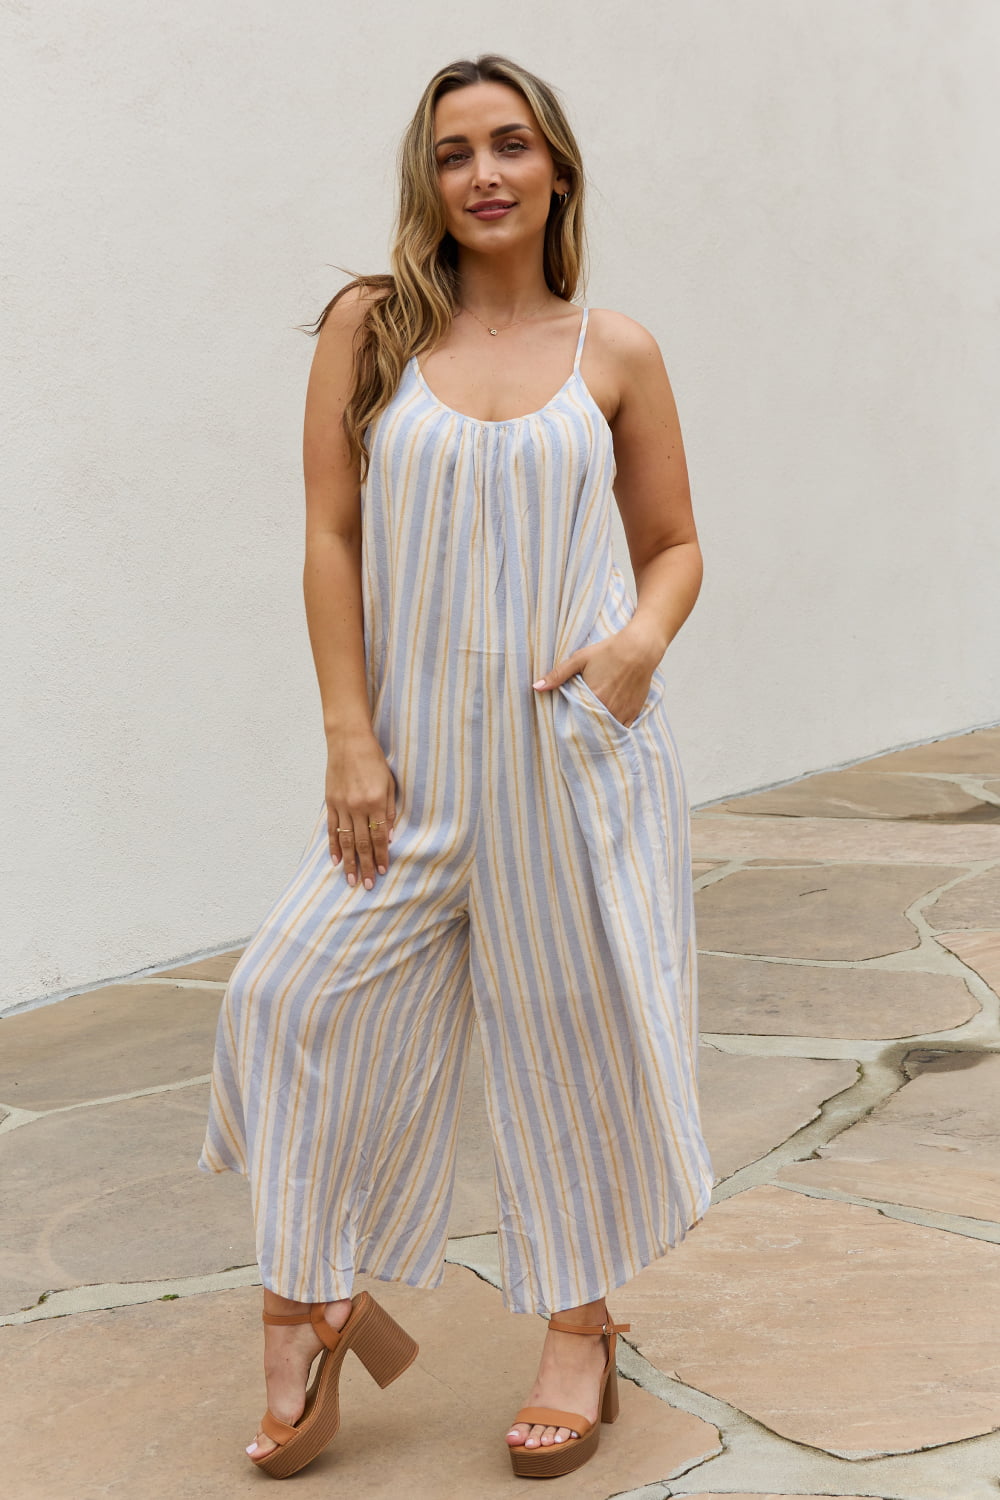 Full Size Multi Colored Striped Jumpsuit with Pockets - Women’s Clothing & Accessories - Jumpsuits & Rompers - 6 - 2024